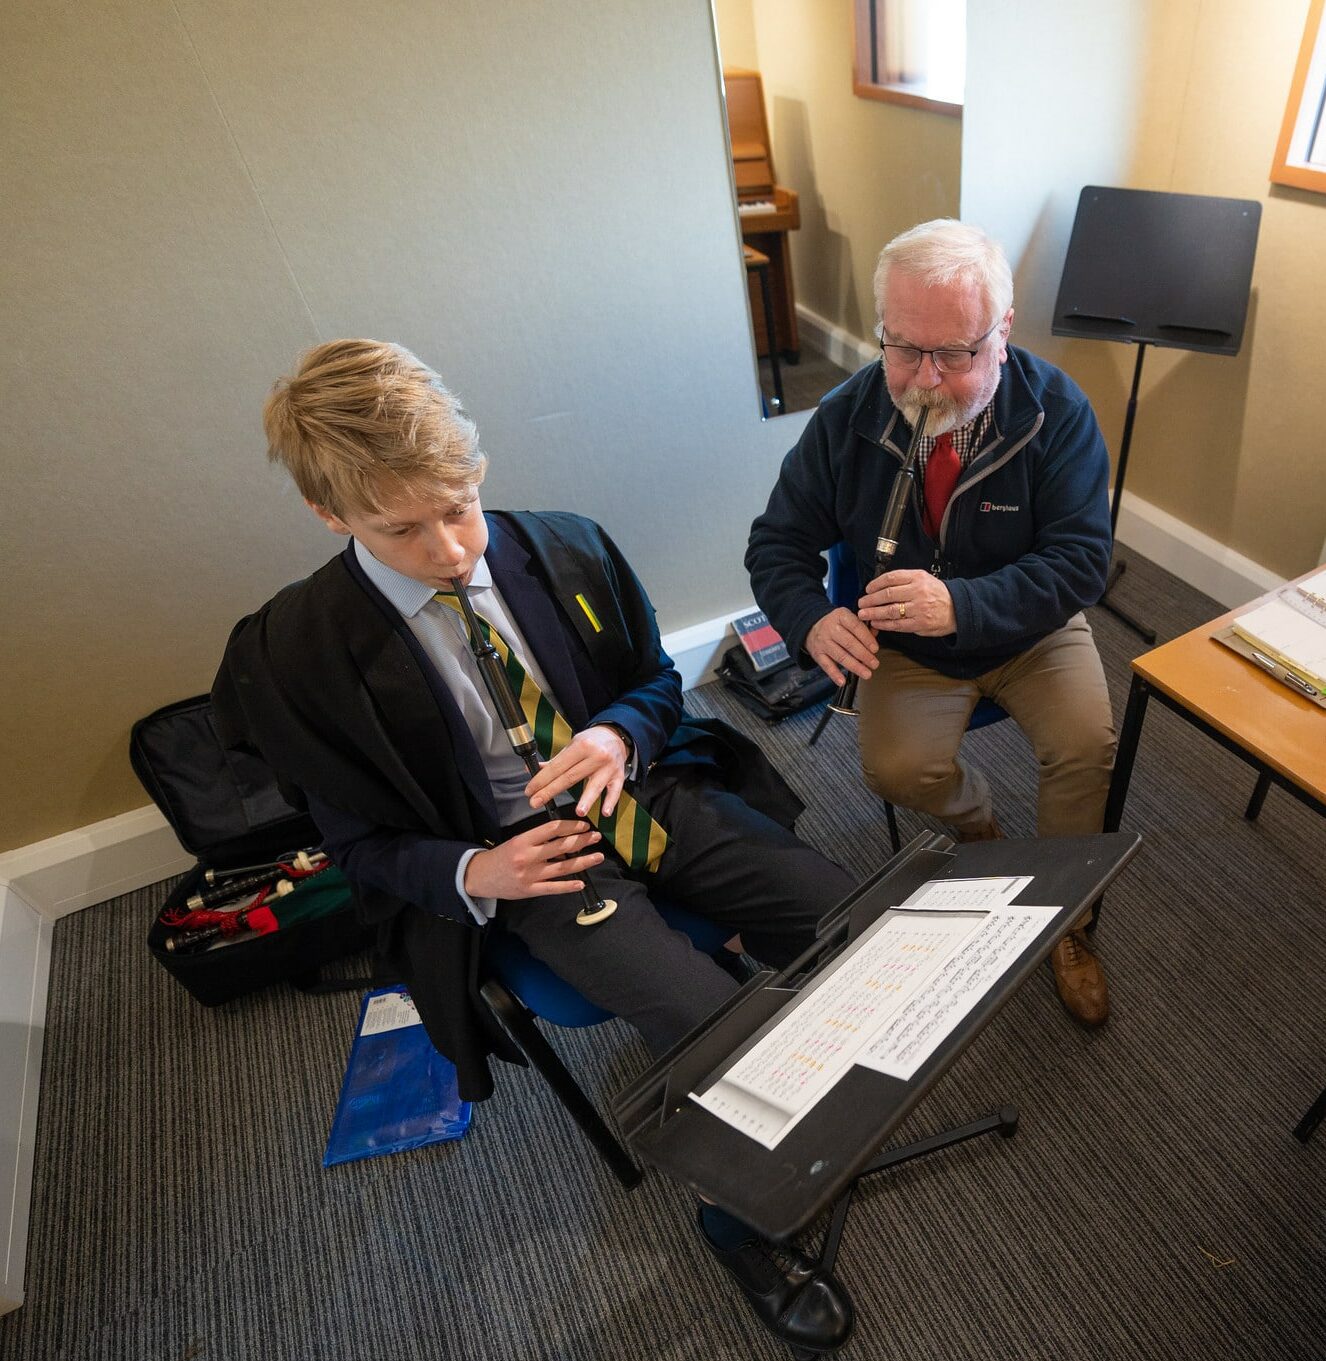 Boy has bagpipes lesson with male teacher in a small room with piano